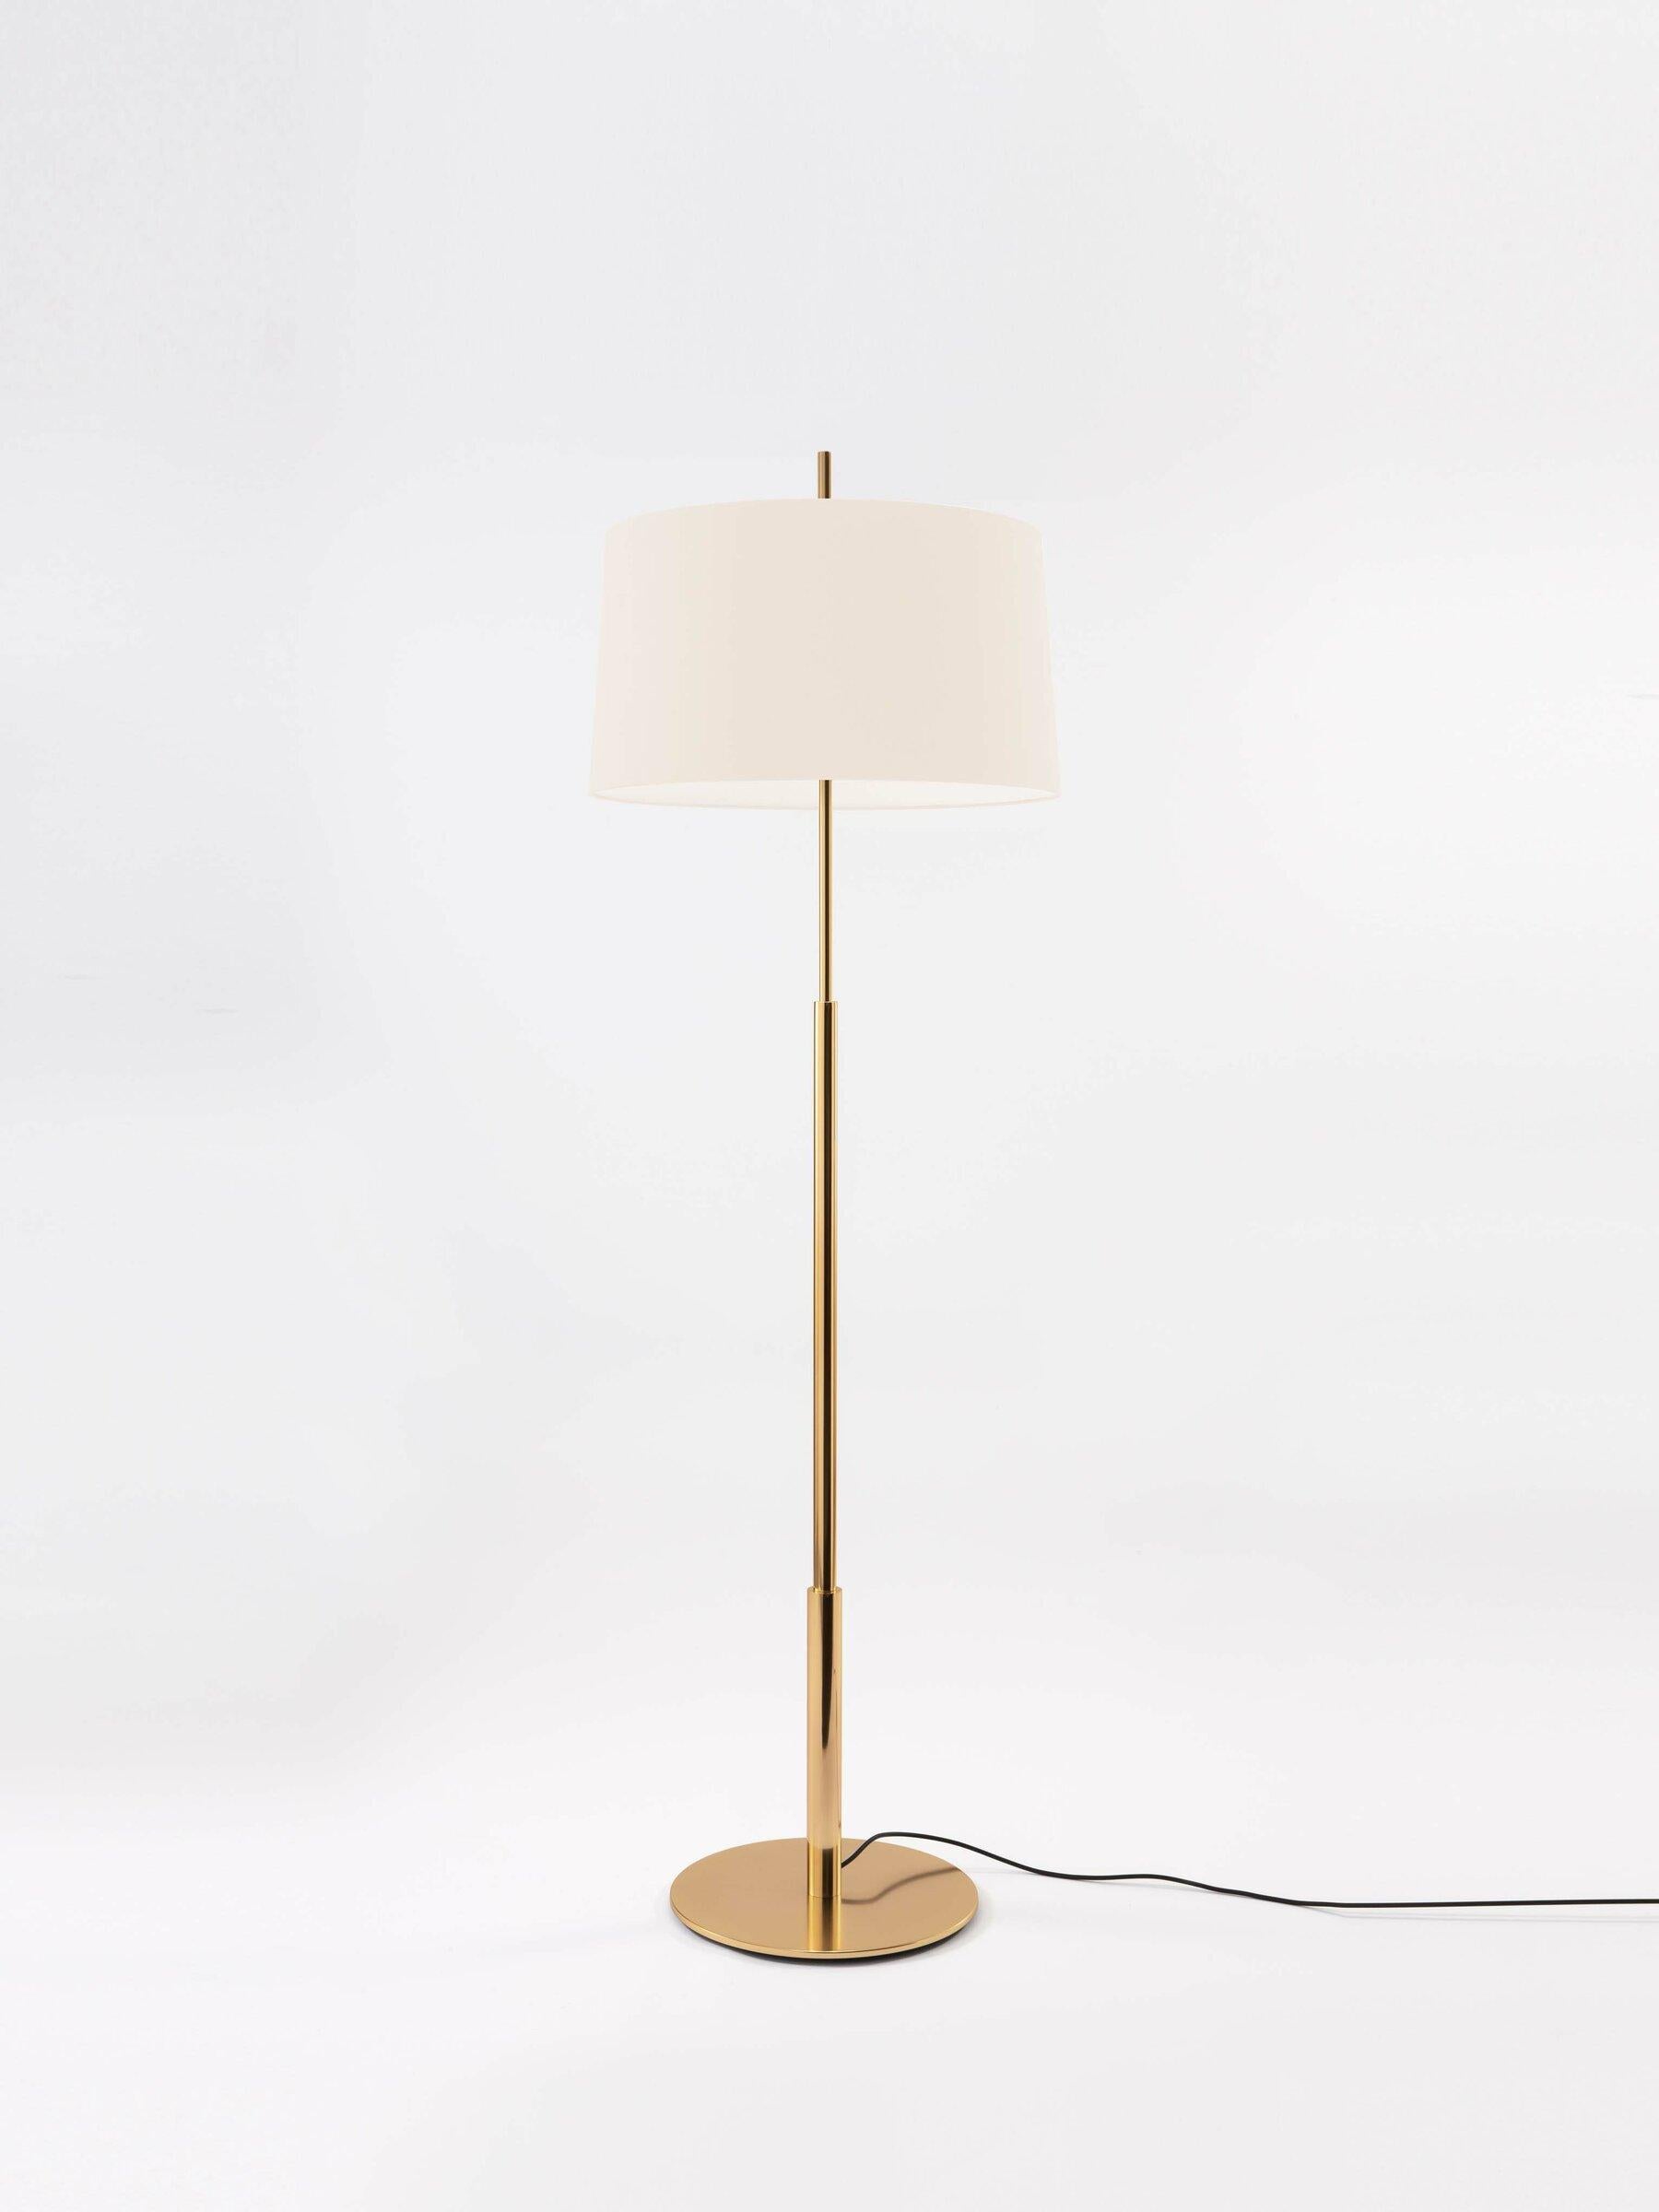 Gold Diana floor lamp by Federico Correa, Alfonso Milá, Miguel Milá
Dimensions: D 45 x H 146 cm
Materials: Metal, linen.
Available in nickel or gold and in black or white shade.

In keeping with the calling of its creators, the Diana lamp has a